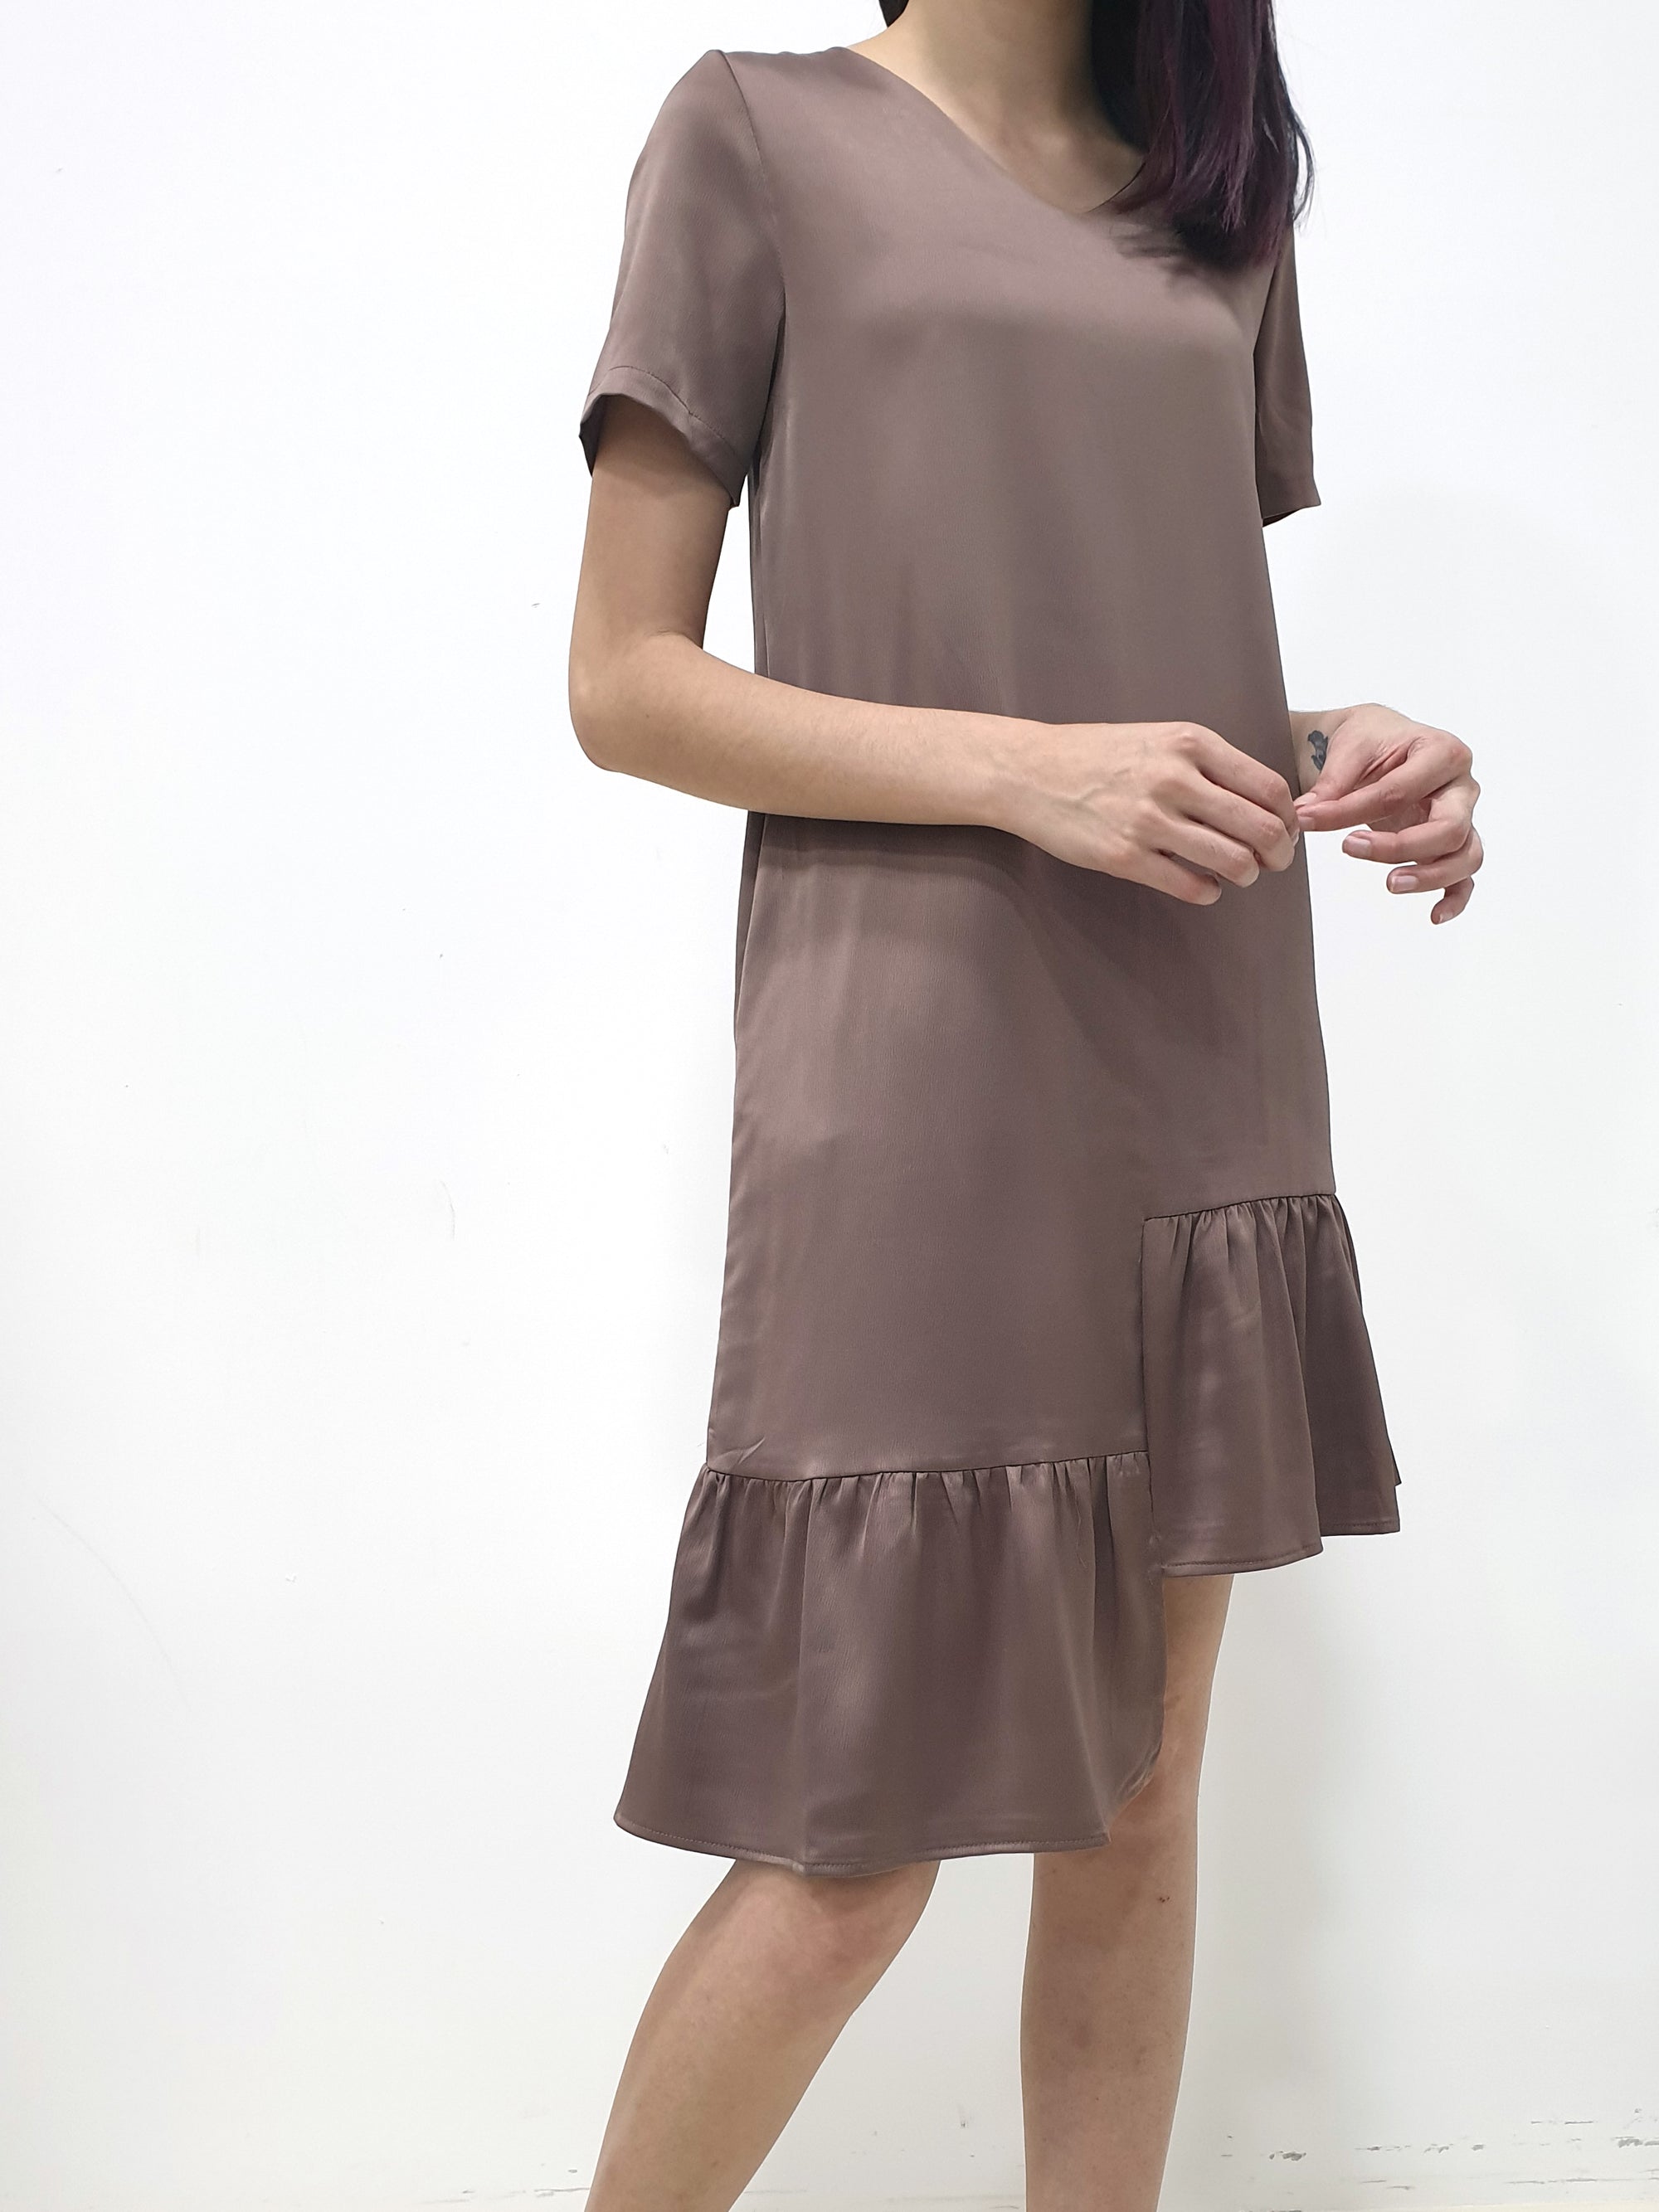 Frosty Hi Low Dress - Brown (Non-returnable) - Ferlicious